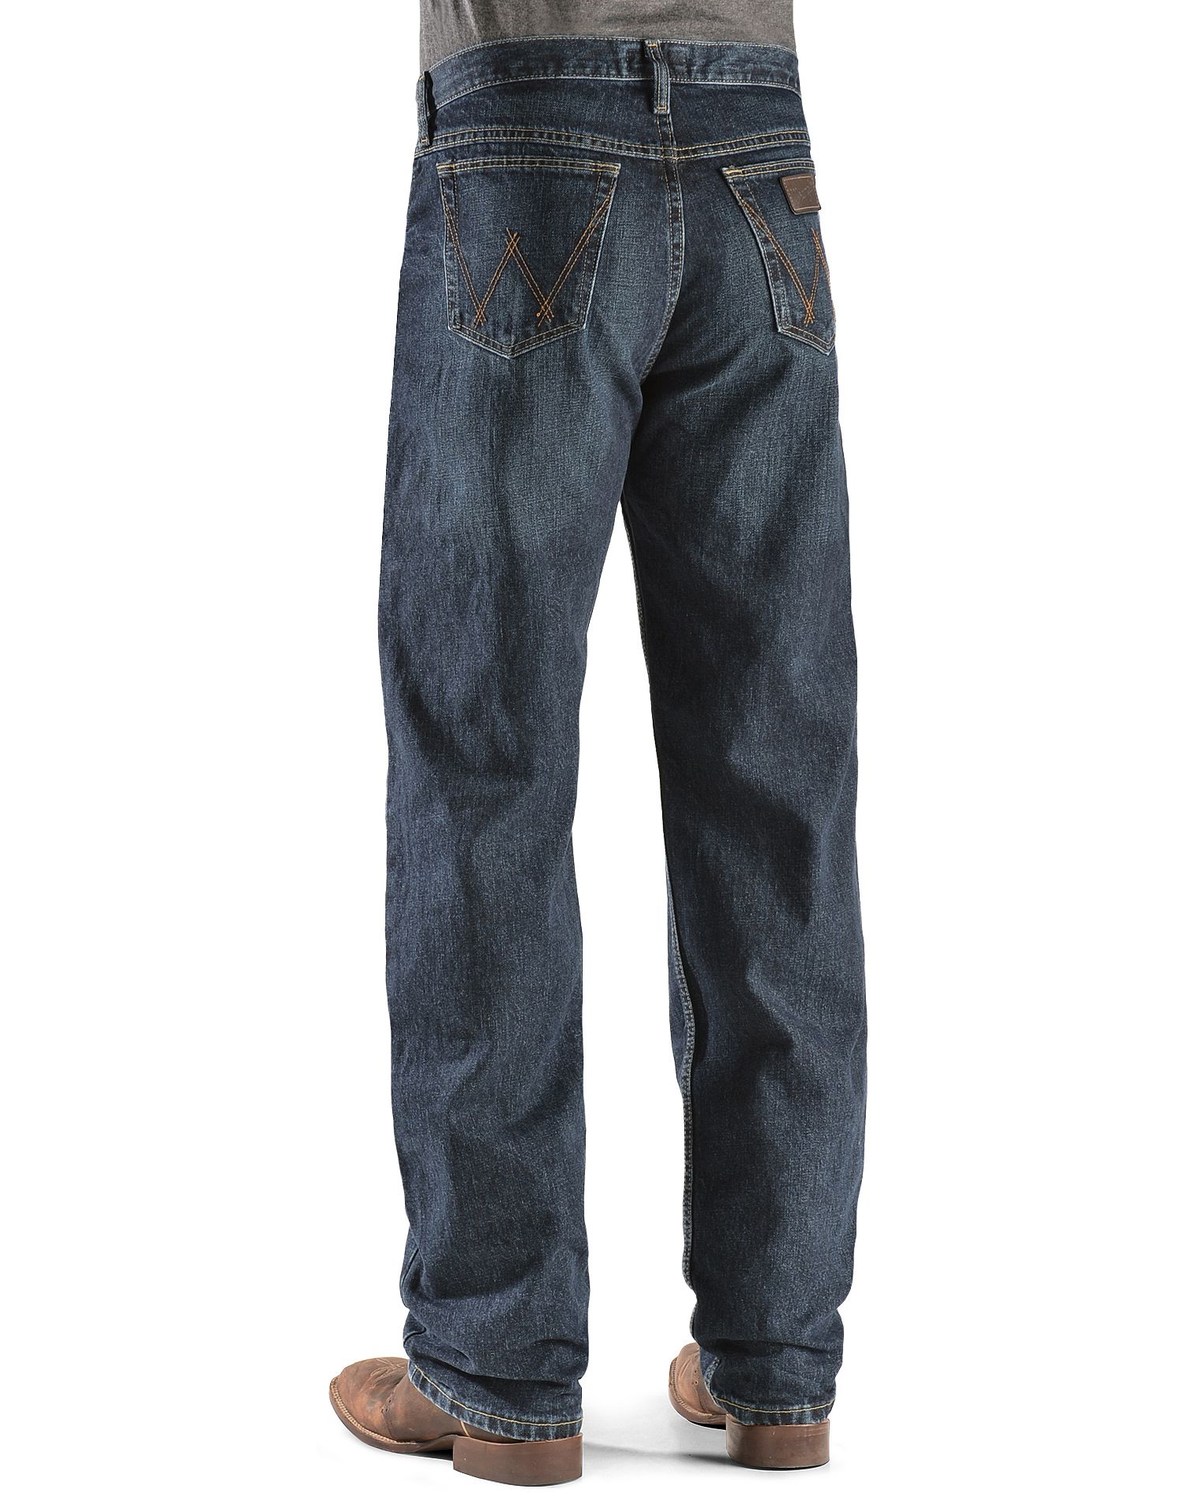 Wrangler 20X Men's Competition Low Rise Relaxed Fit Bootcut Jeans